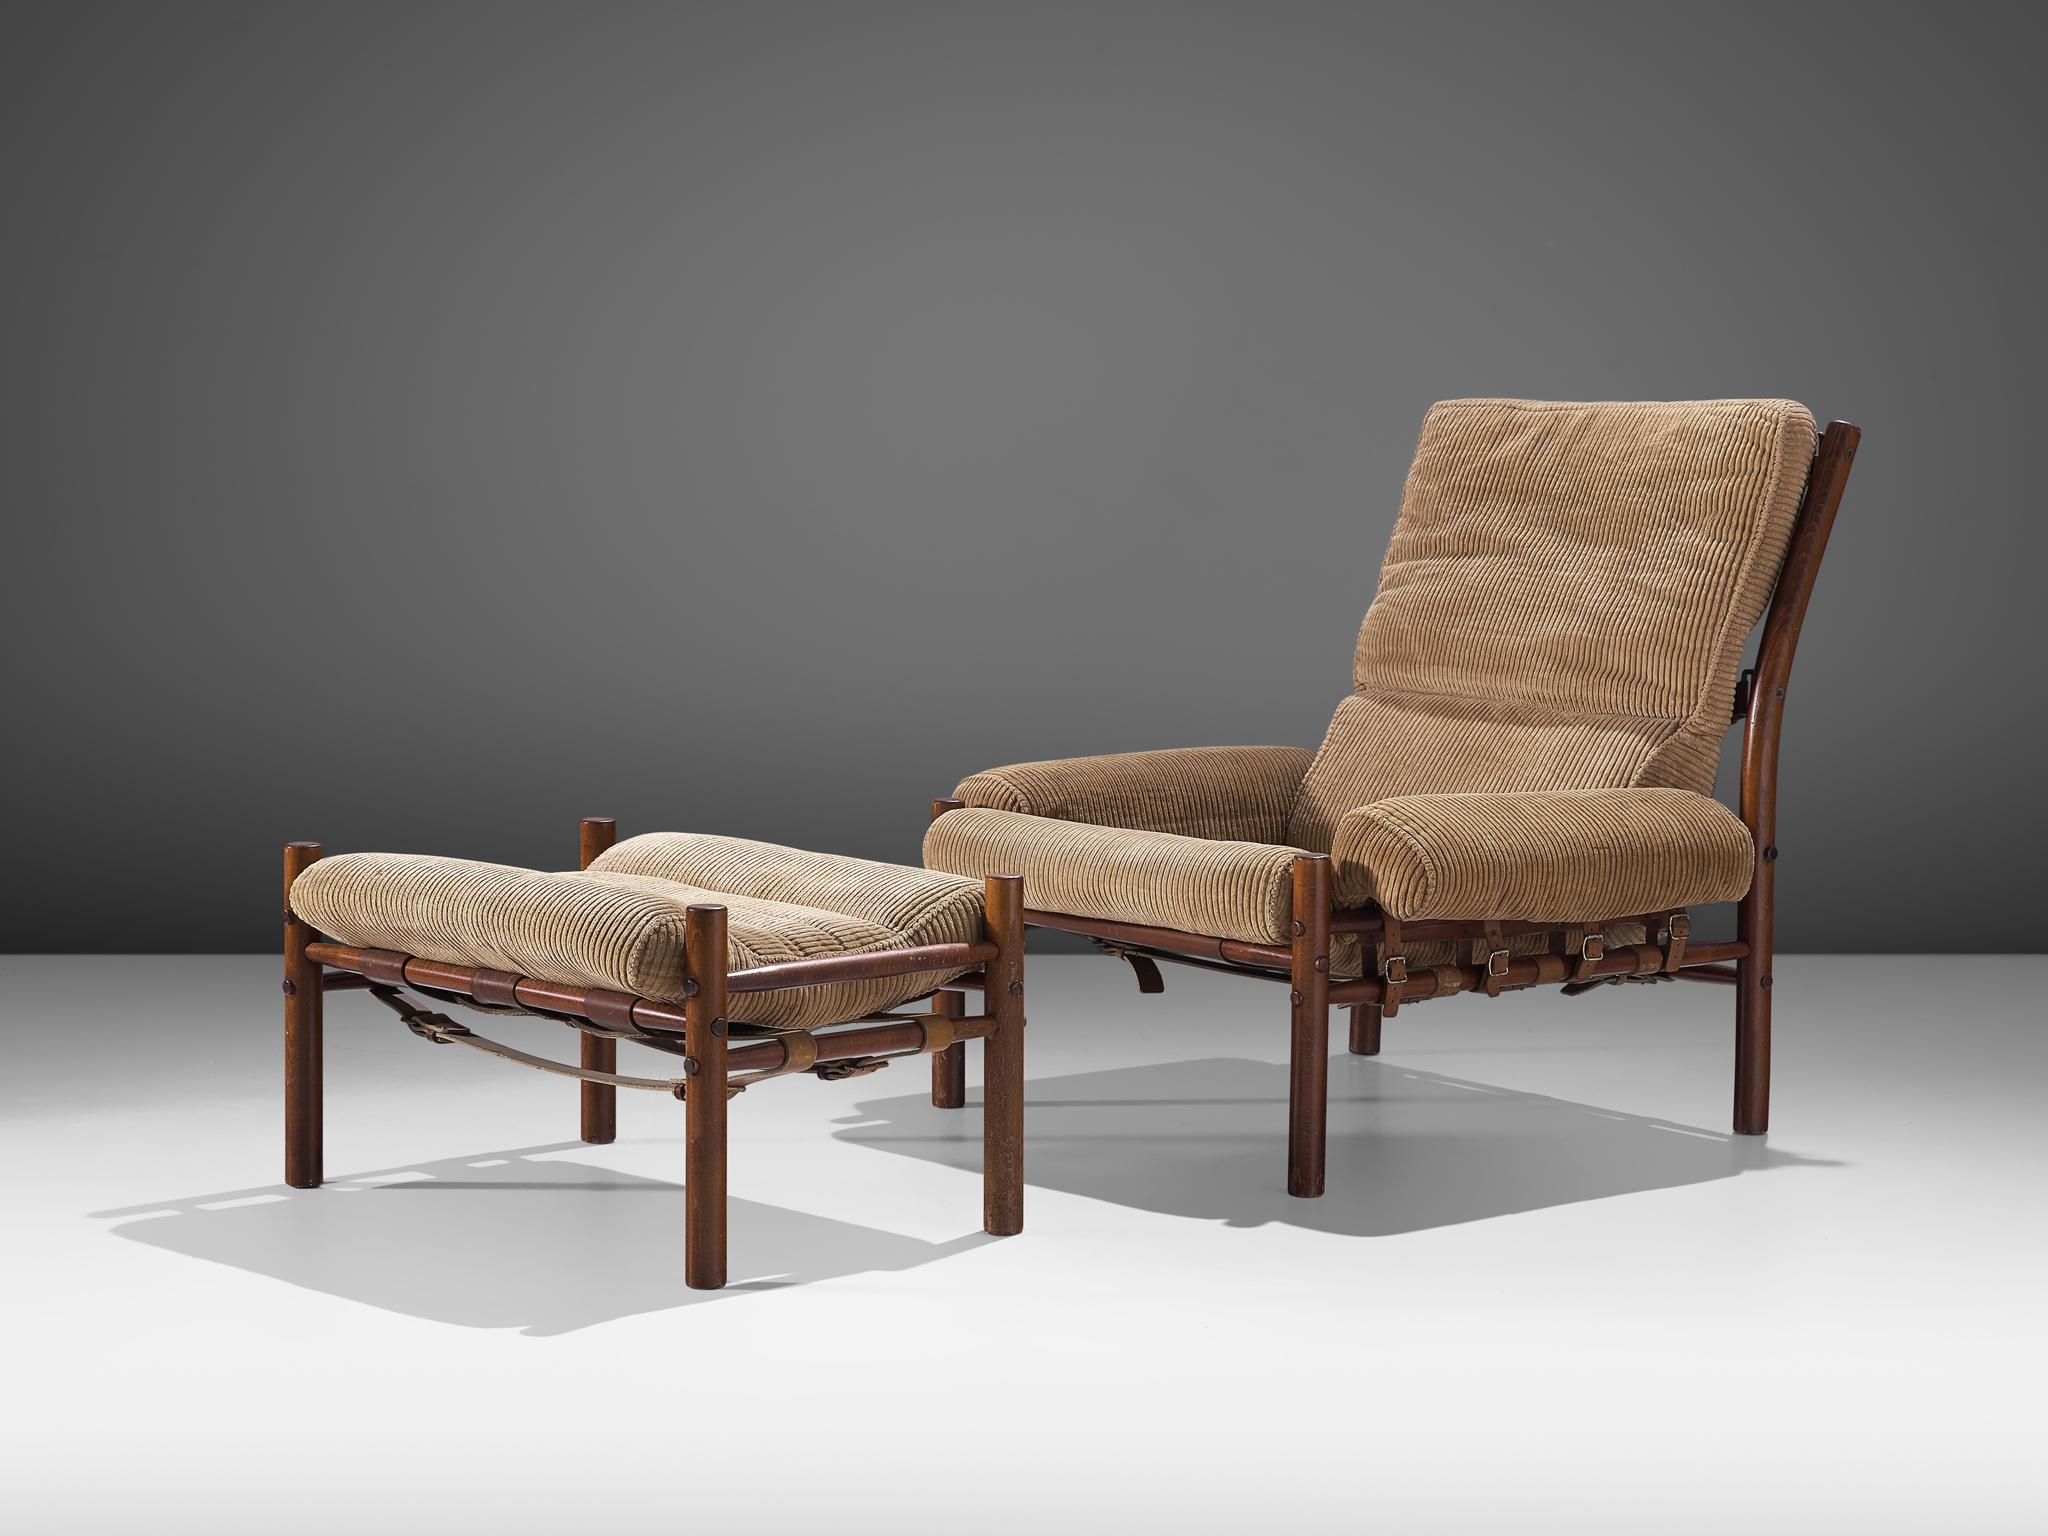 Arne Norell, 'Inca' lounge chair with ottoman, fabric, beech and leather, Sweden, 1965.

The iconic 'Inca' lounge chair with ottoman in a sand color corduroy, designed by Arne Norell. The frame is made from stained beech. Moreover, the base of the